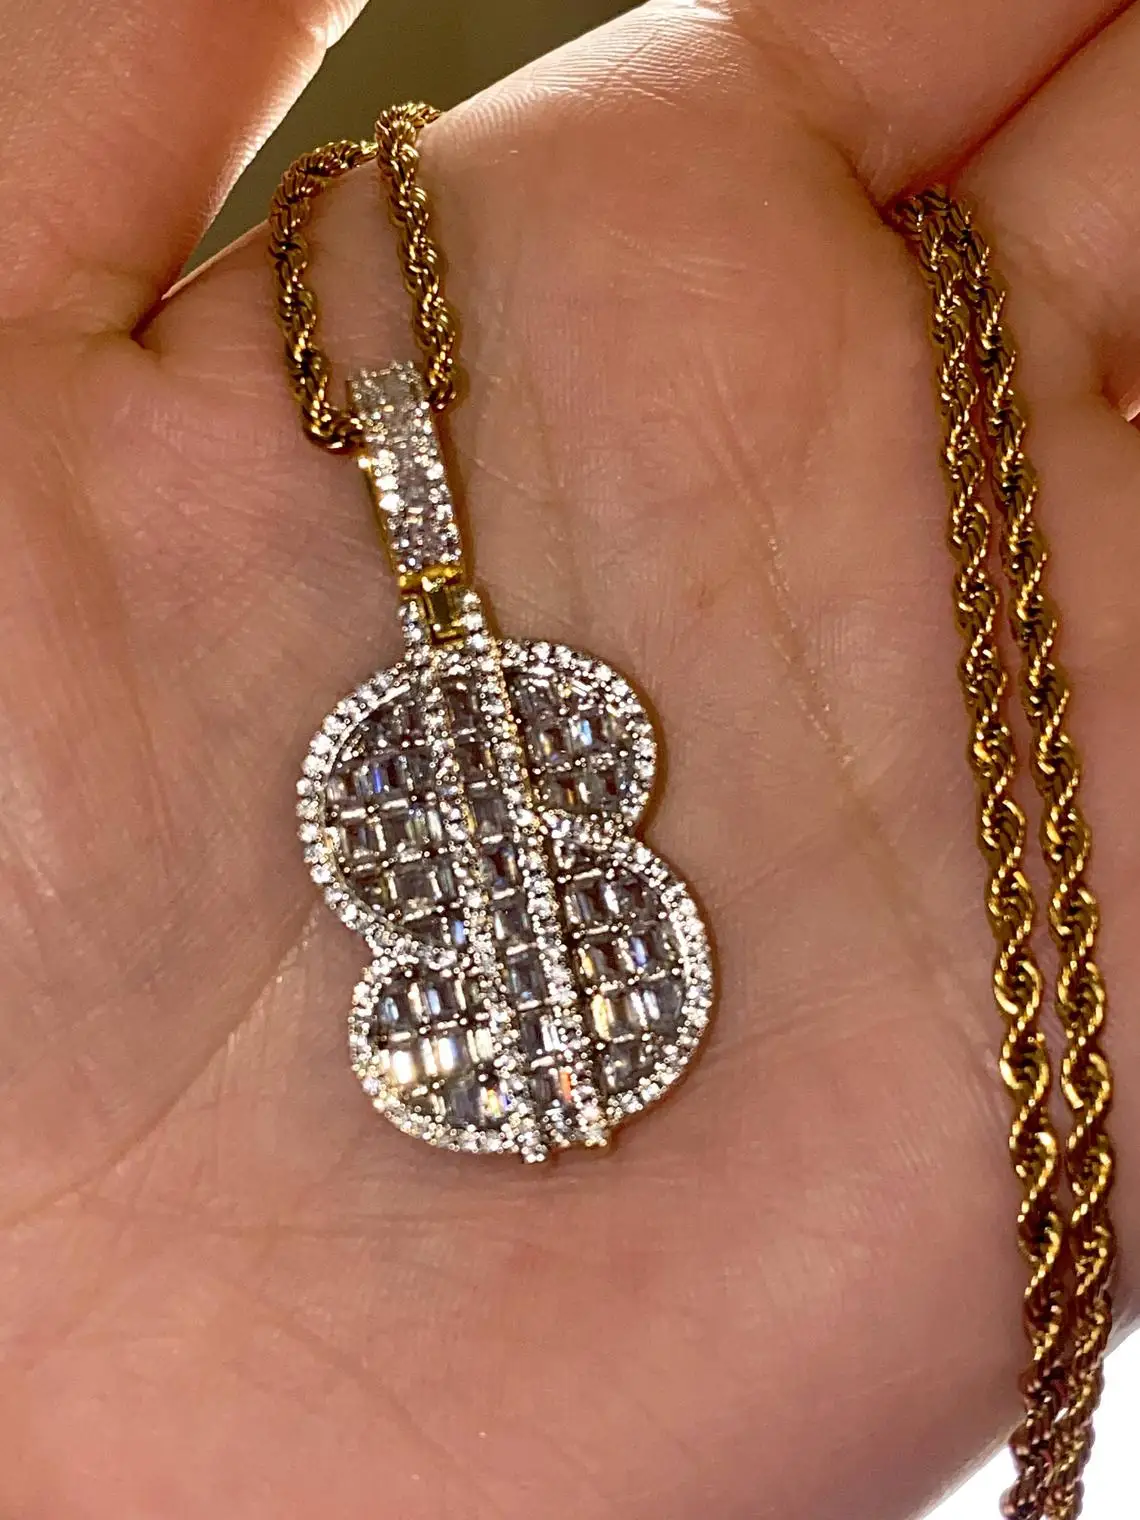 Mens Iced Out Jewelry Gold Plated Baguette Cz Diamond Letter Initial Pendant hip hop dollar sign necklace